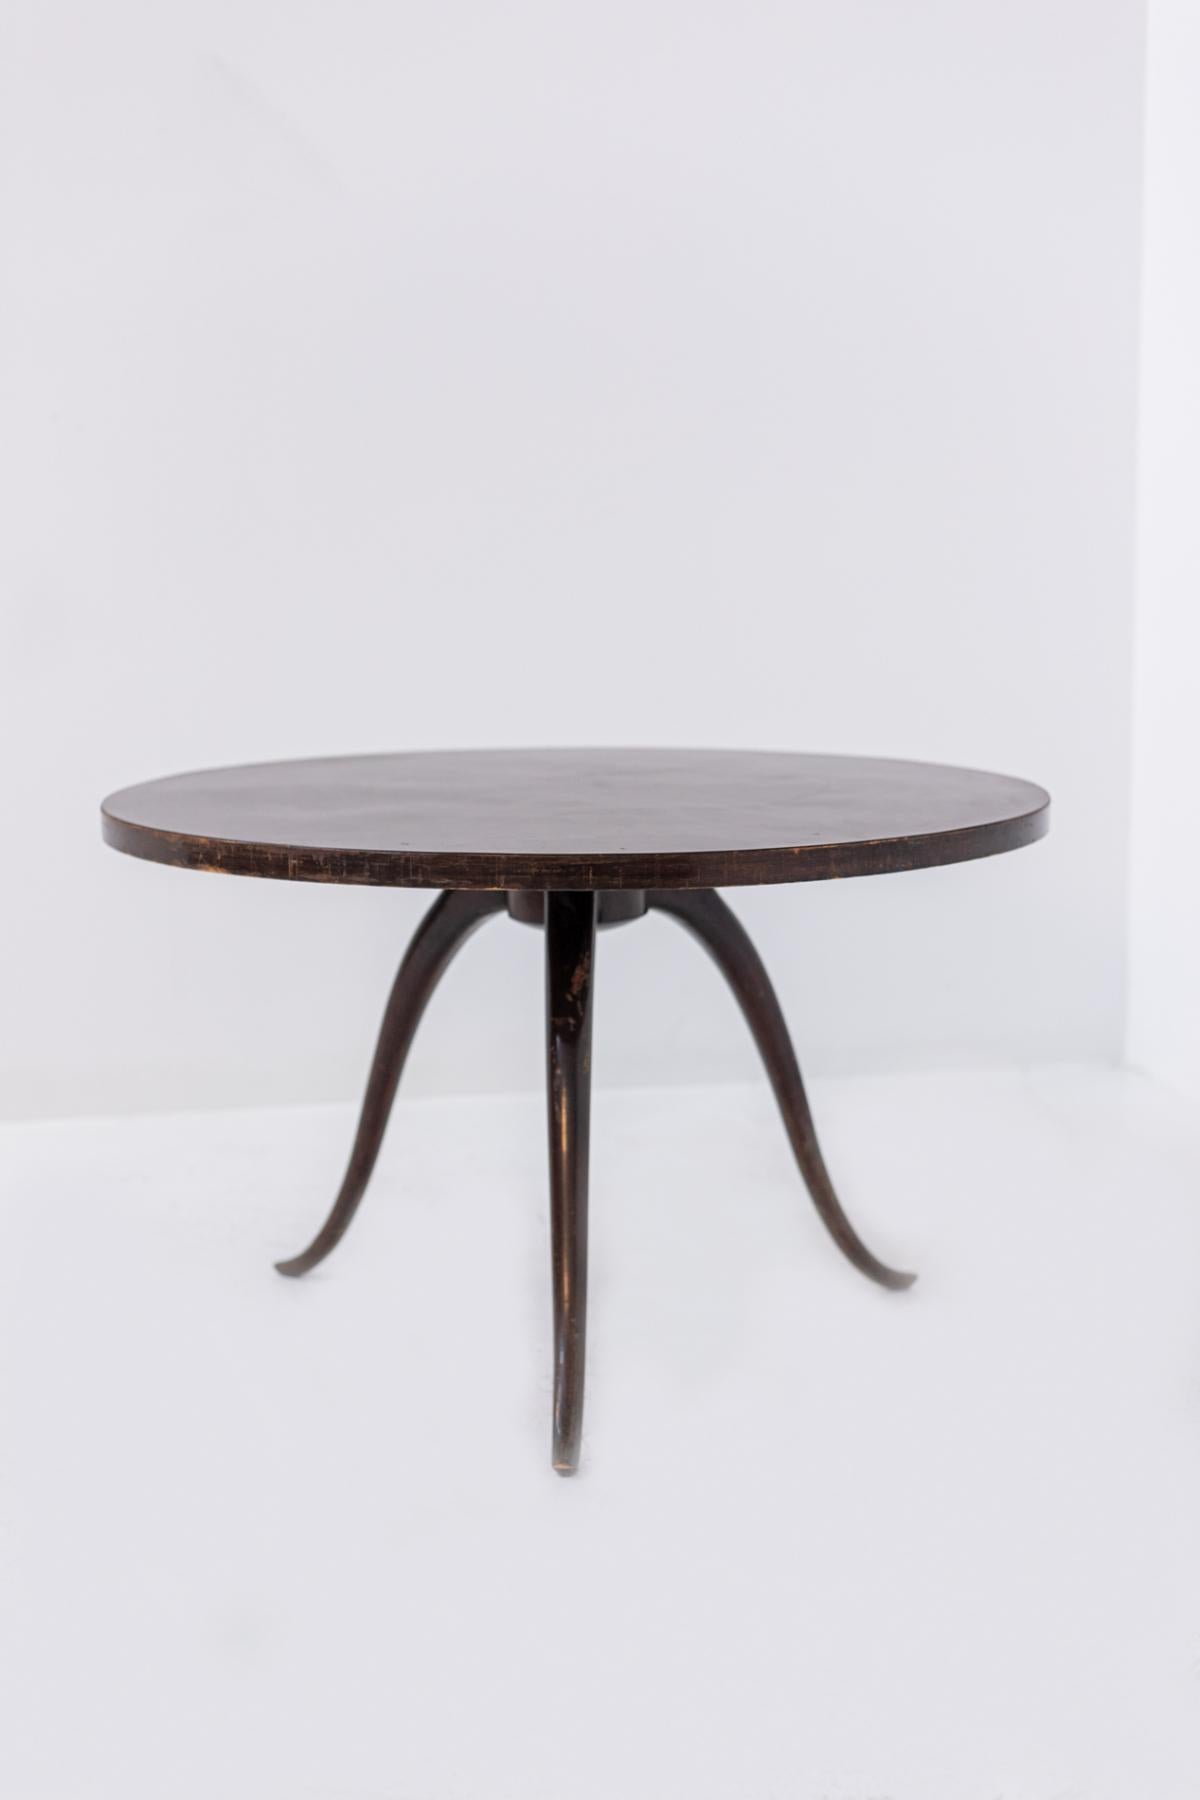 Mid-20th Century Guglielmo Ulrich Wooden Coffee Table For Sale